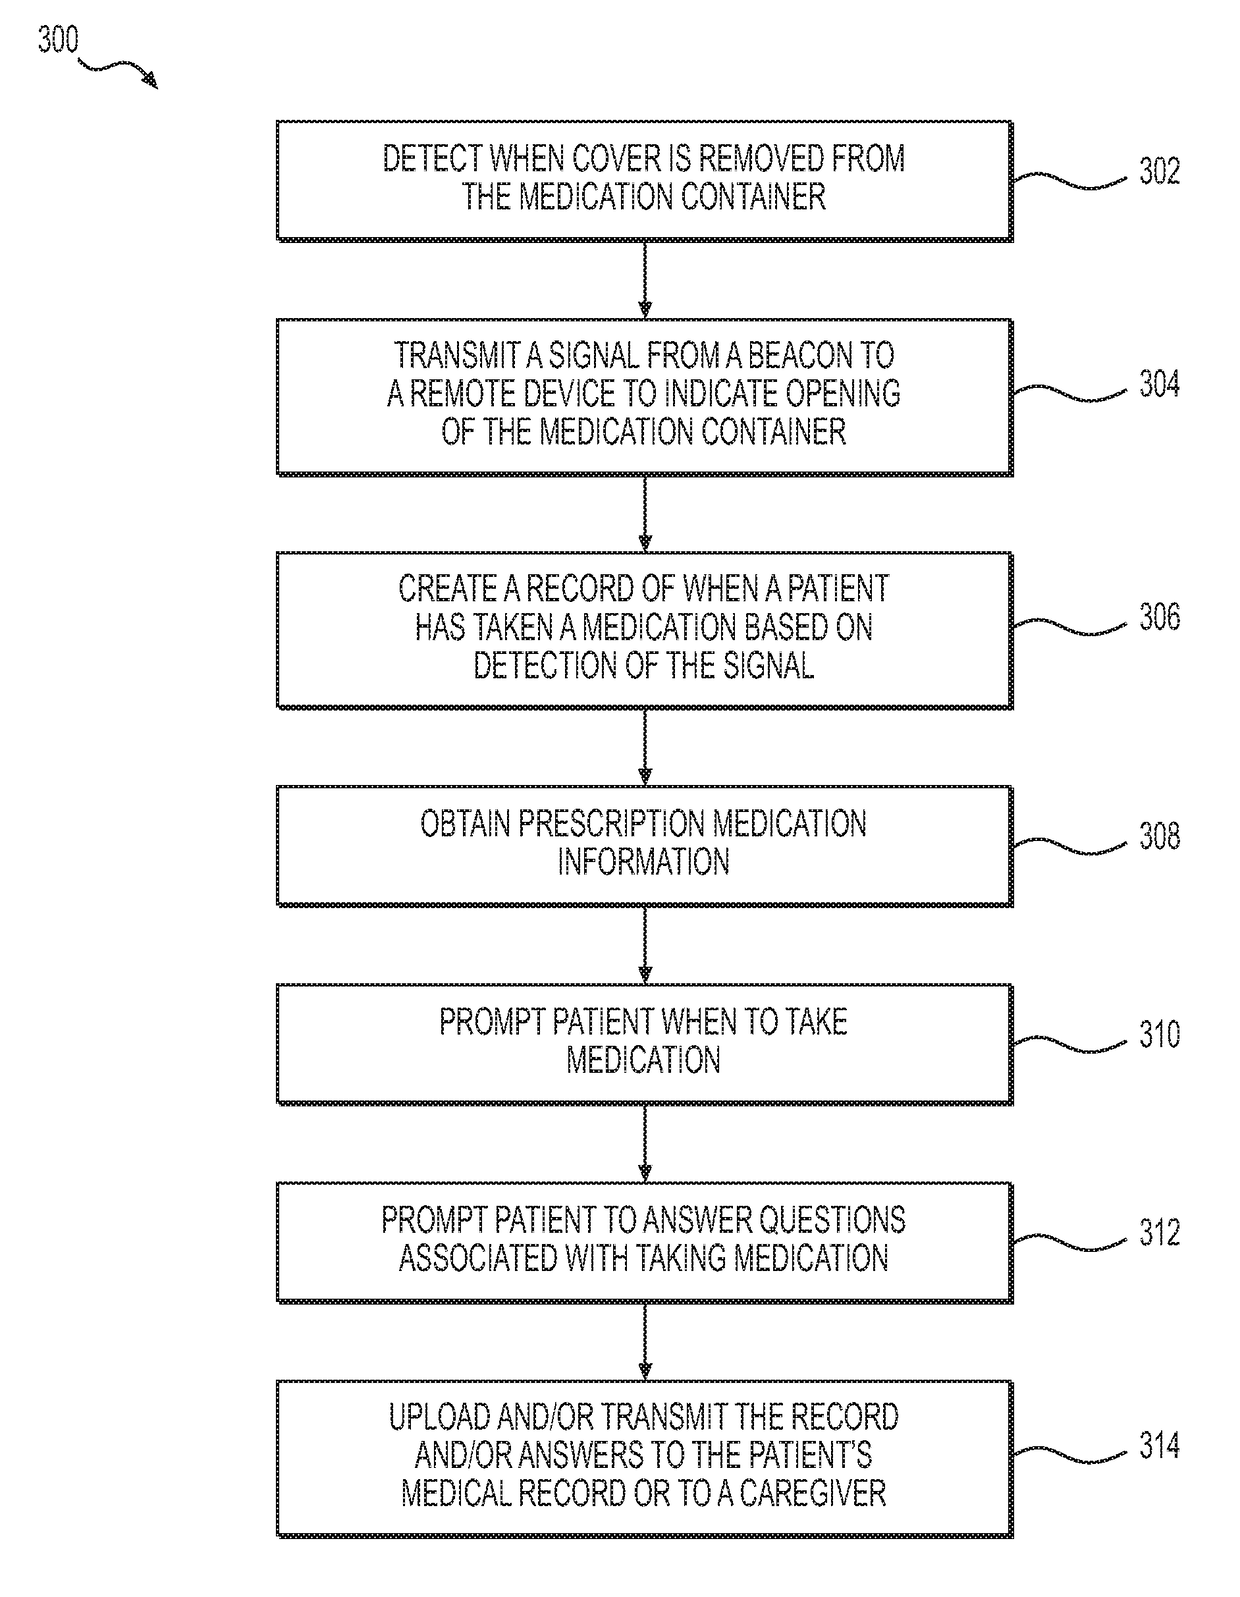 Systems and methods for monitoring medication adherence and compliance